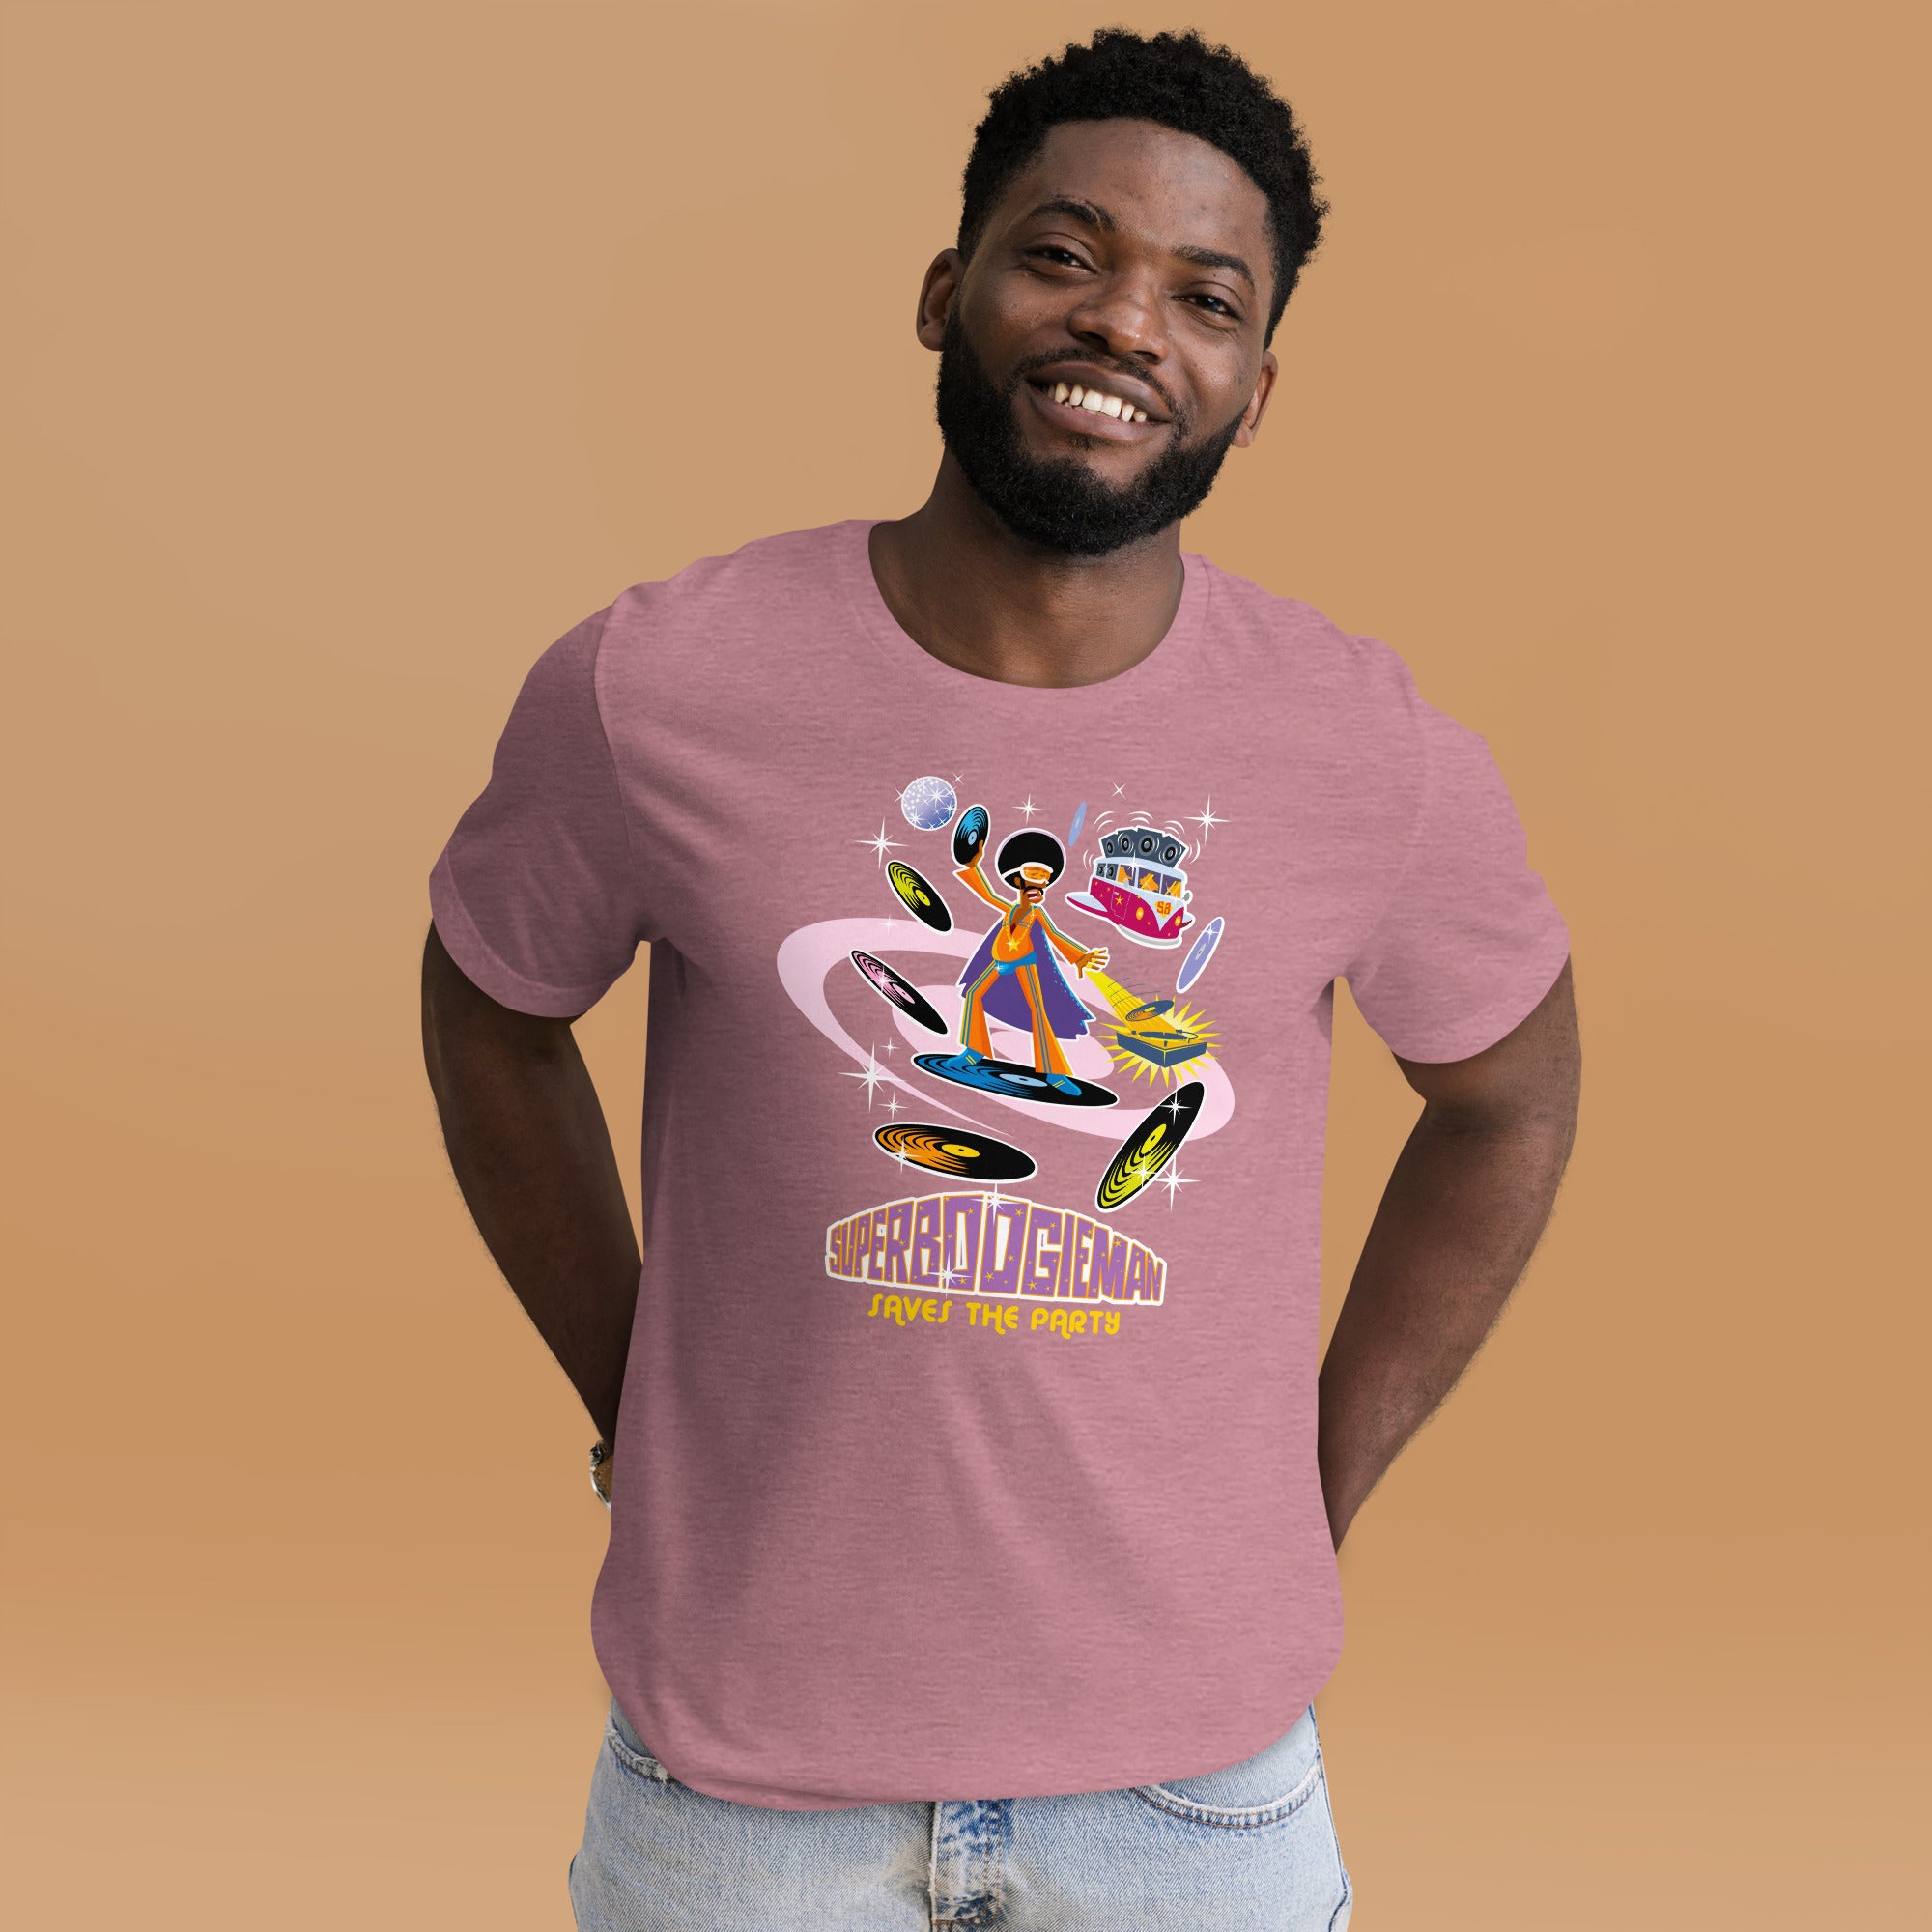 Unisex t-shirt Superboogieman saves the Party on bright heather colors